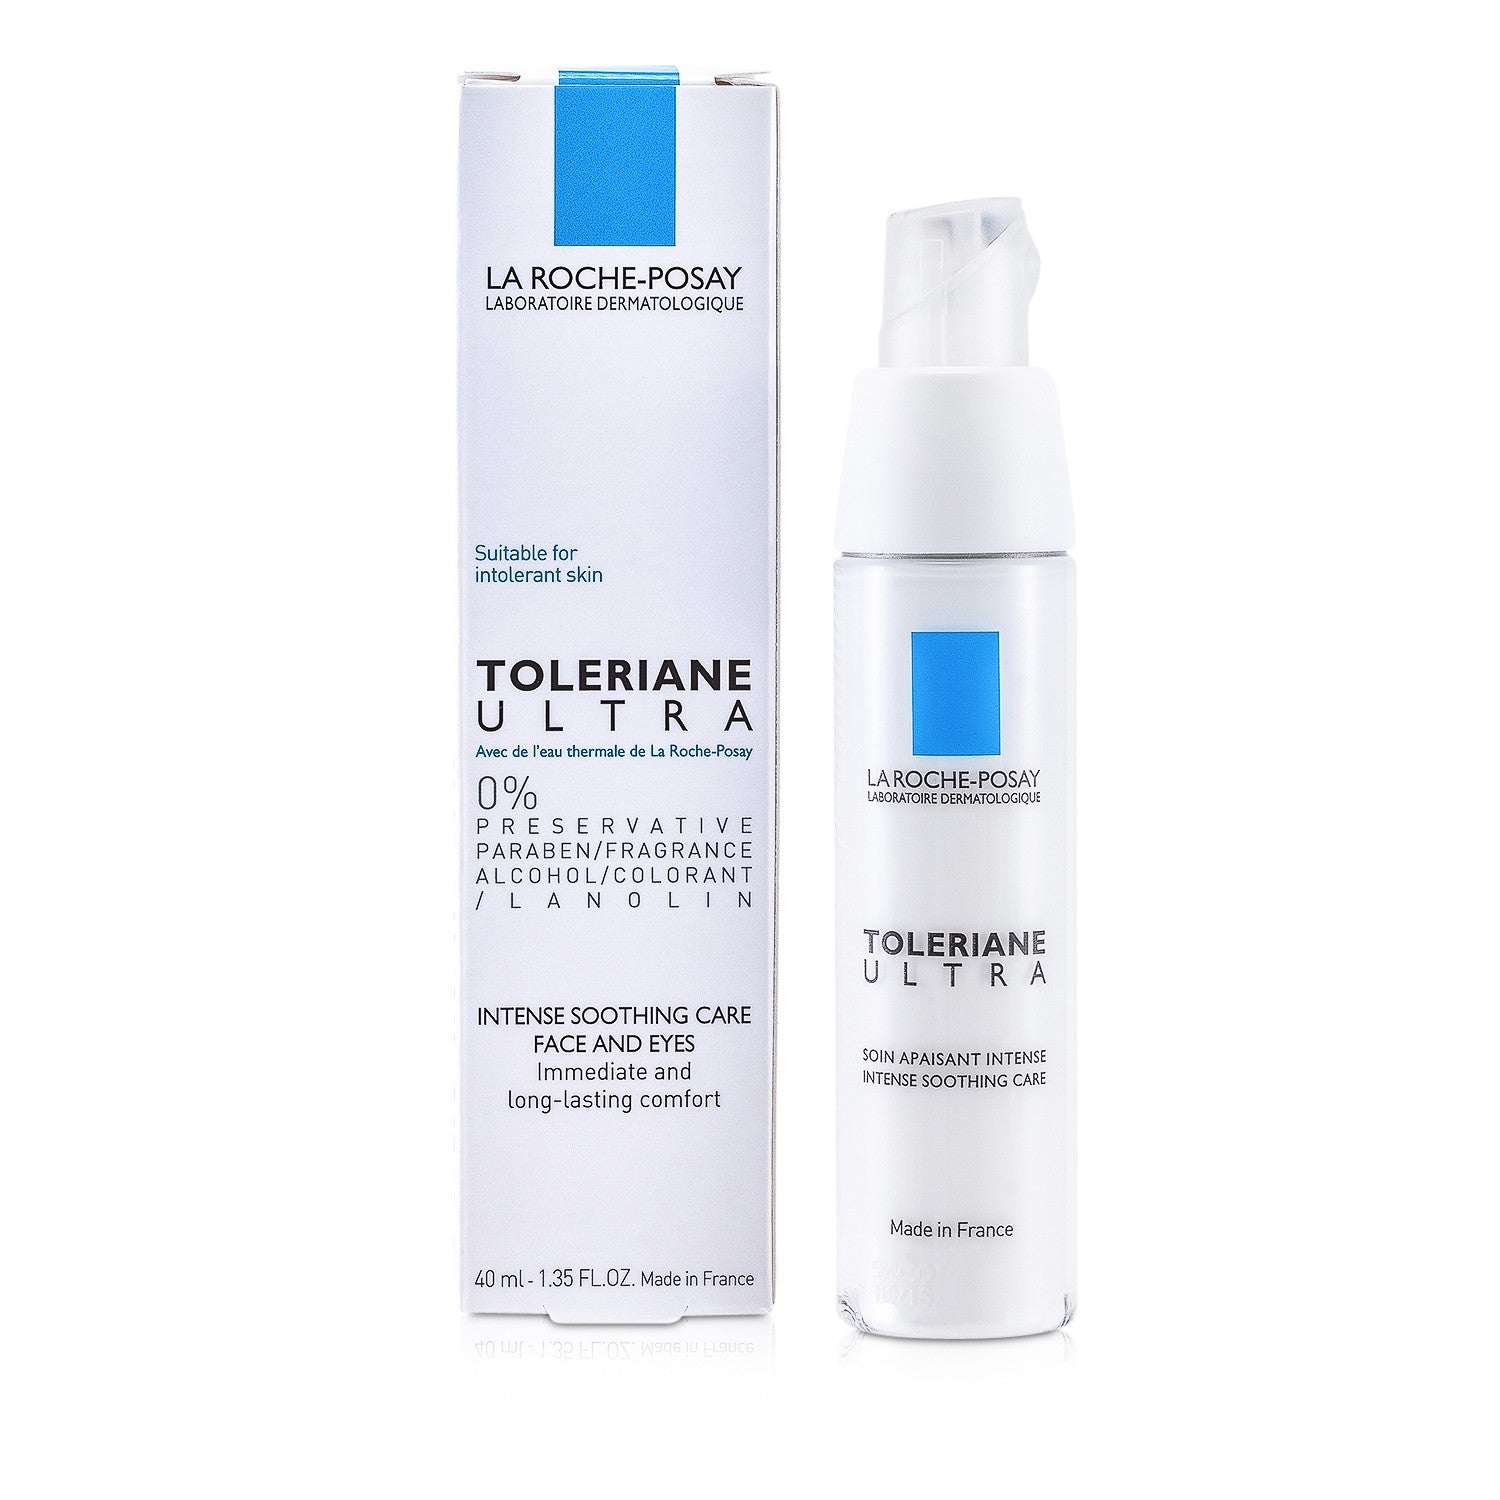 Toleriane Ultra Intense Soothing Care for Sale | La Posay, Skincare, Buy Now – Author